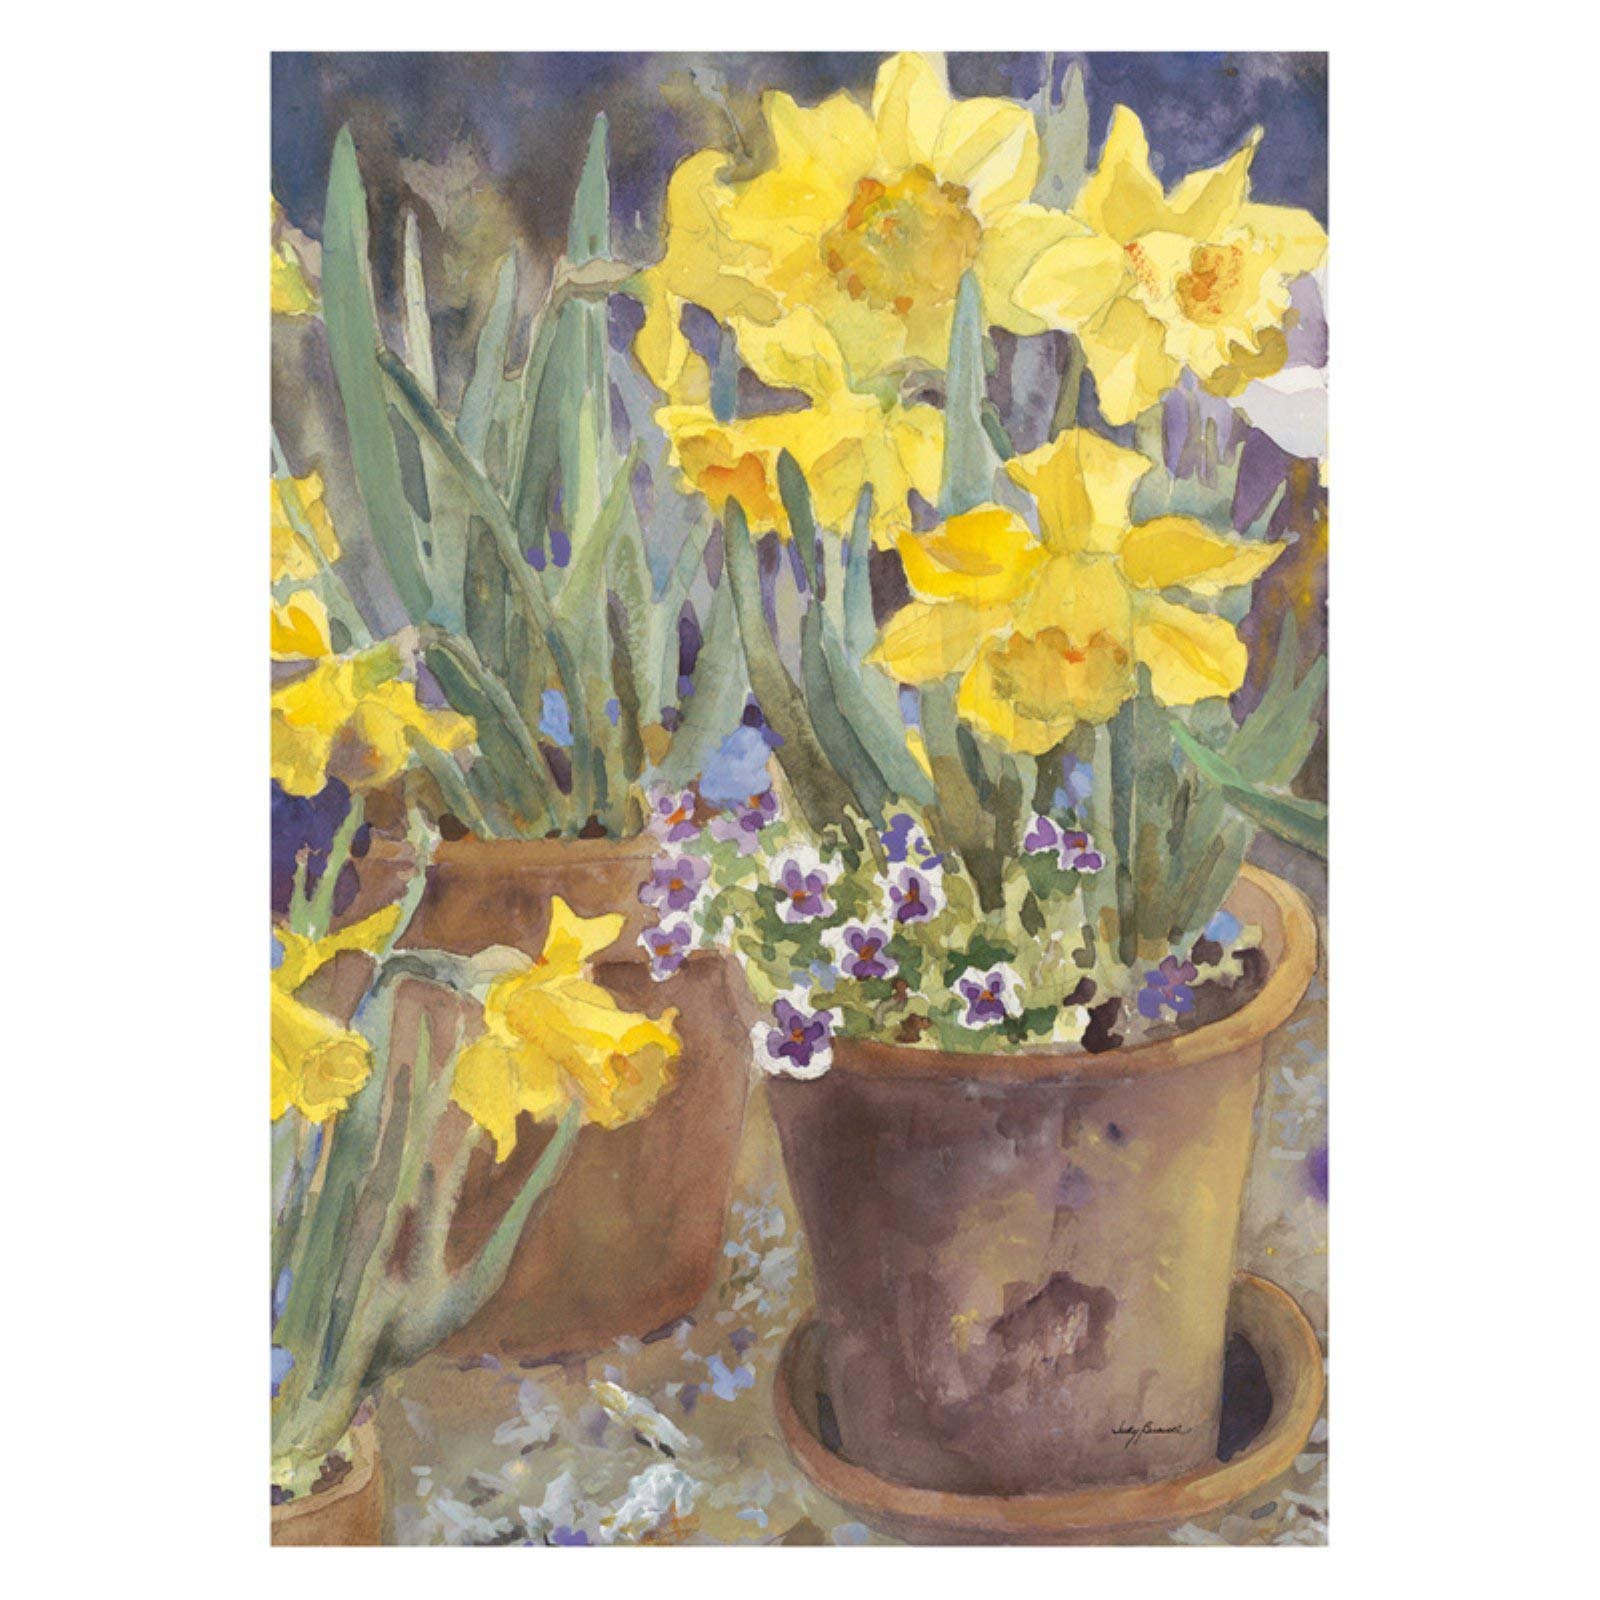 Toland Home Garden 119137 Potted Daffodils Spring Garden Flag, 12x18 Inch, Double Sided for Outdoor Summer House Yard Decoration